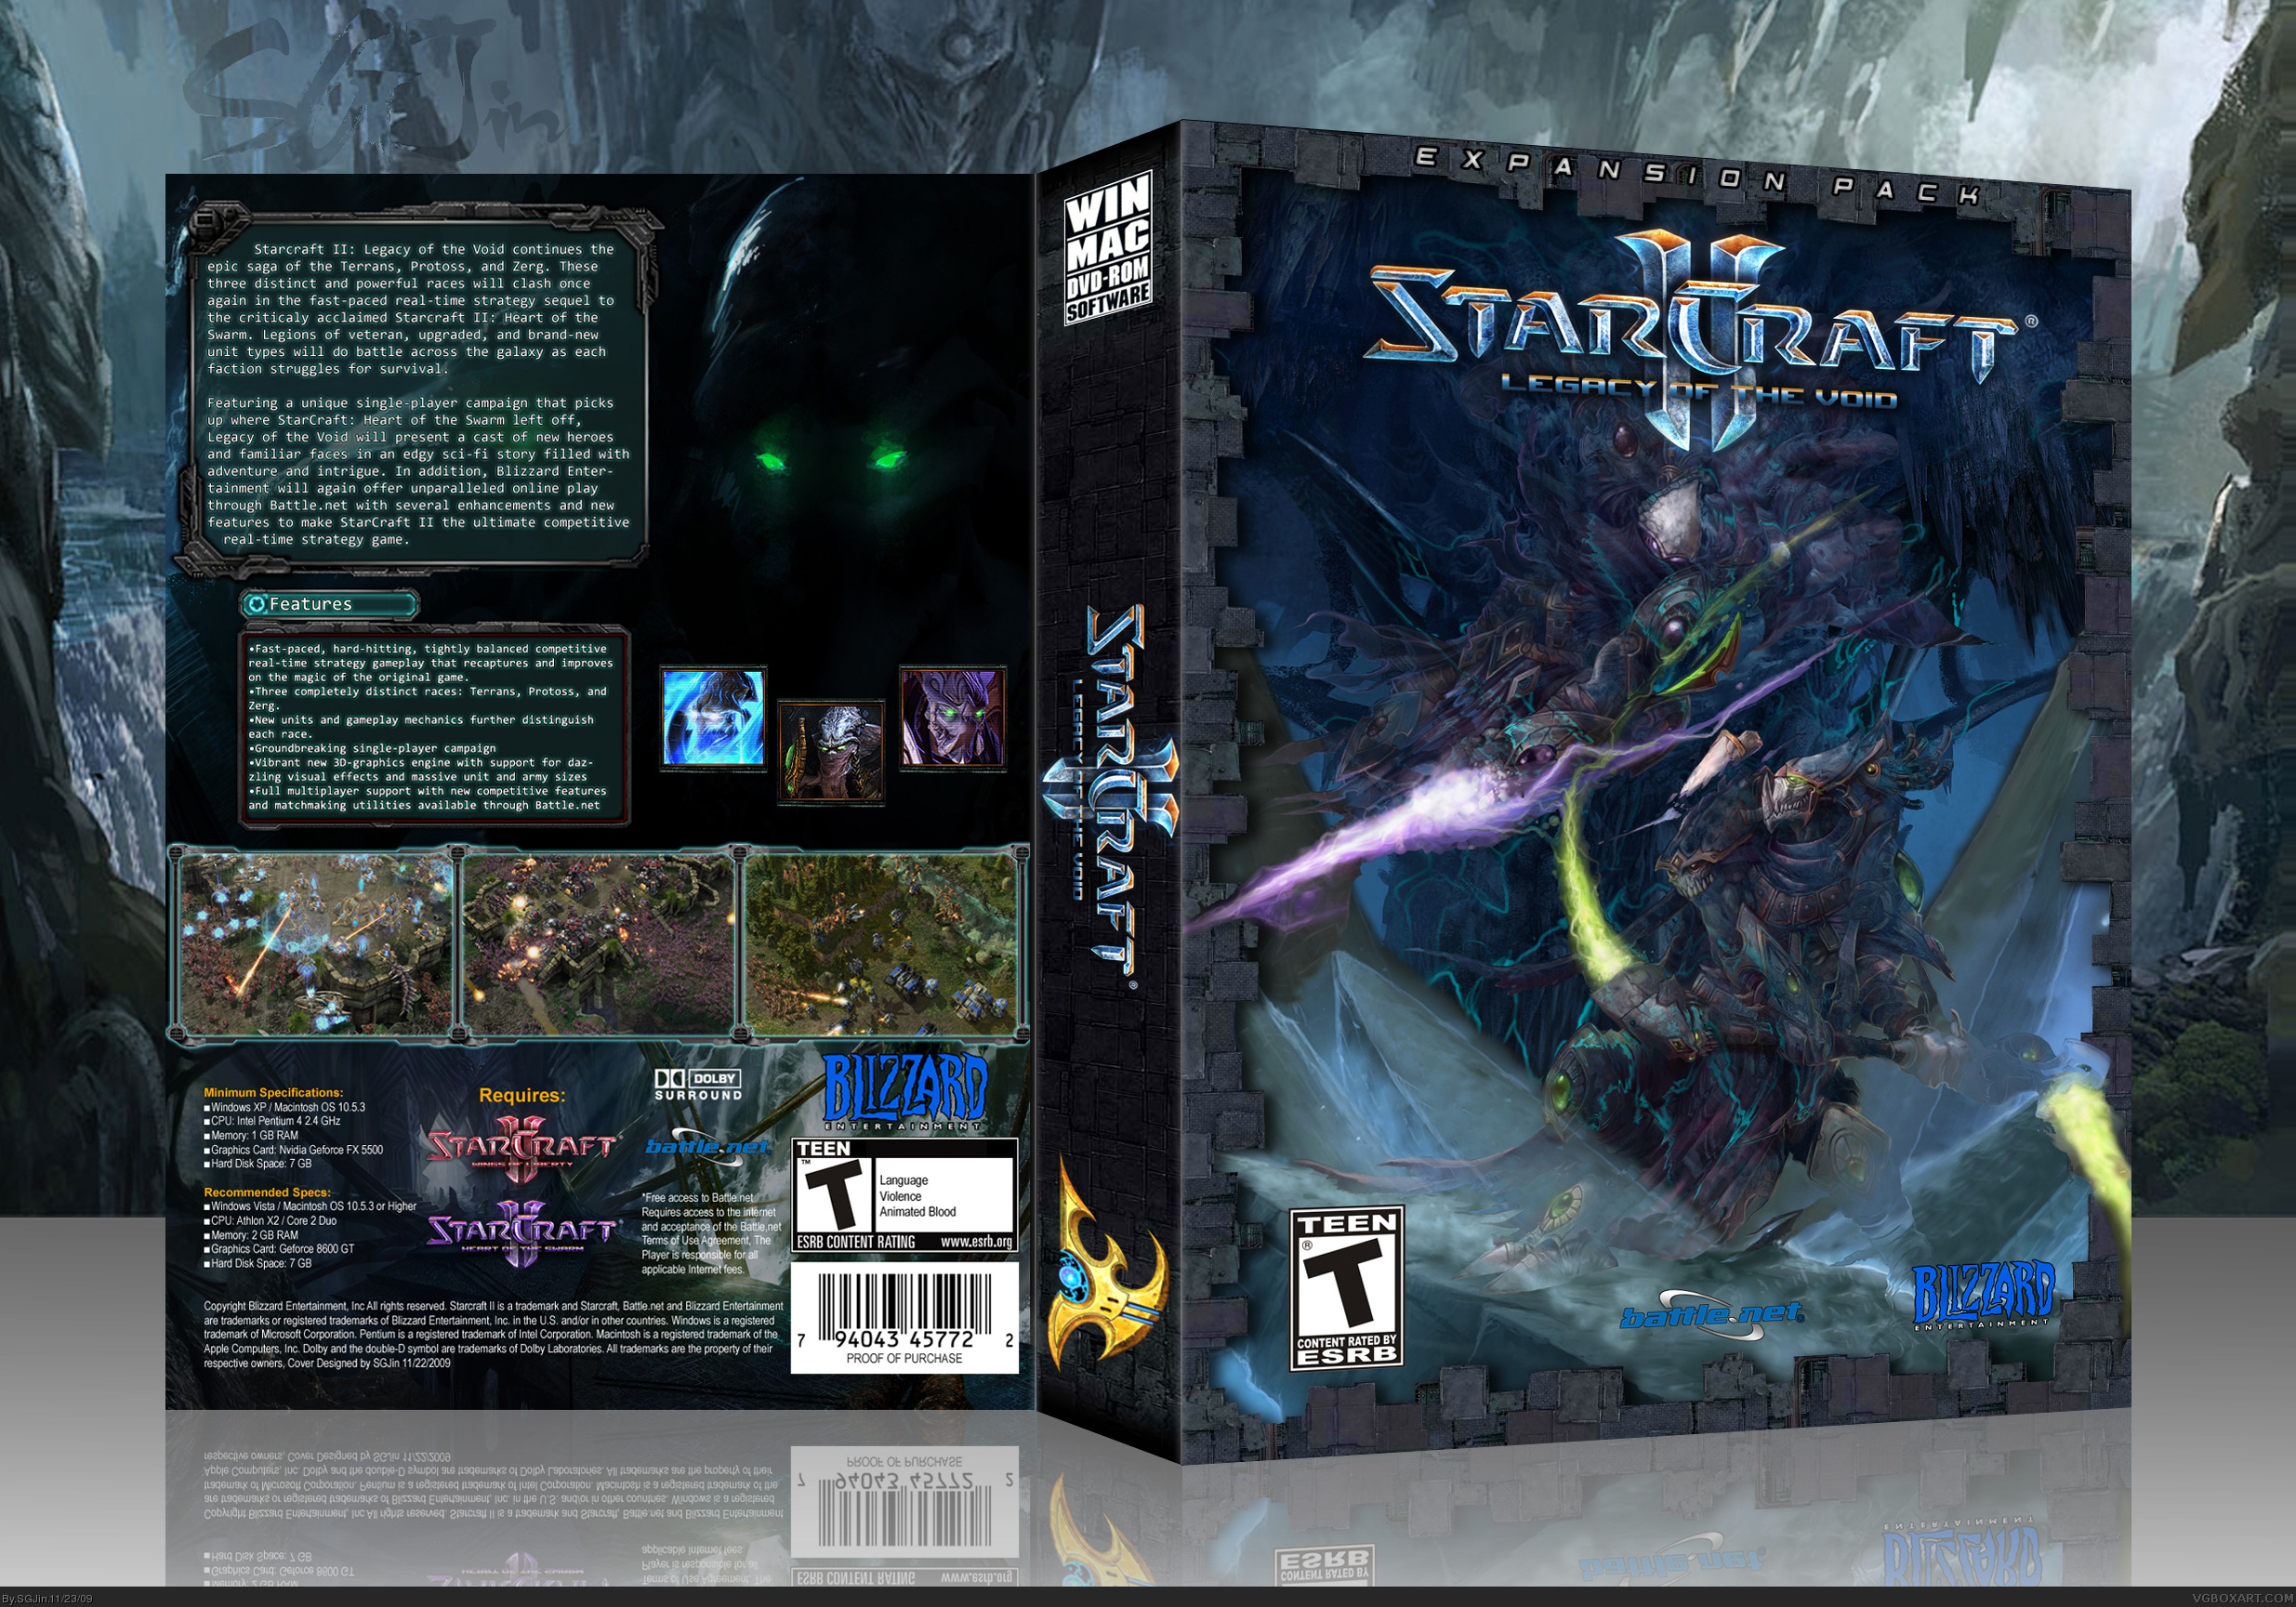 Voices of the void craft. STARCRAFT 2 Legacy of the Void диск. STARCRAFT 2 Legacy of the Void обложка. Диск старкрафт 2 Legacy of the Void. Старкрафт Legacy of the Void.